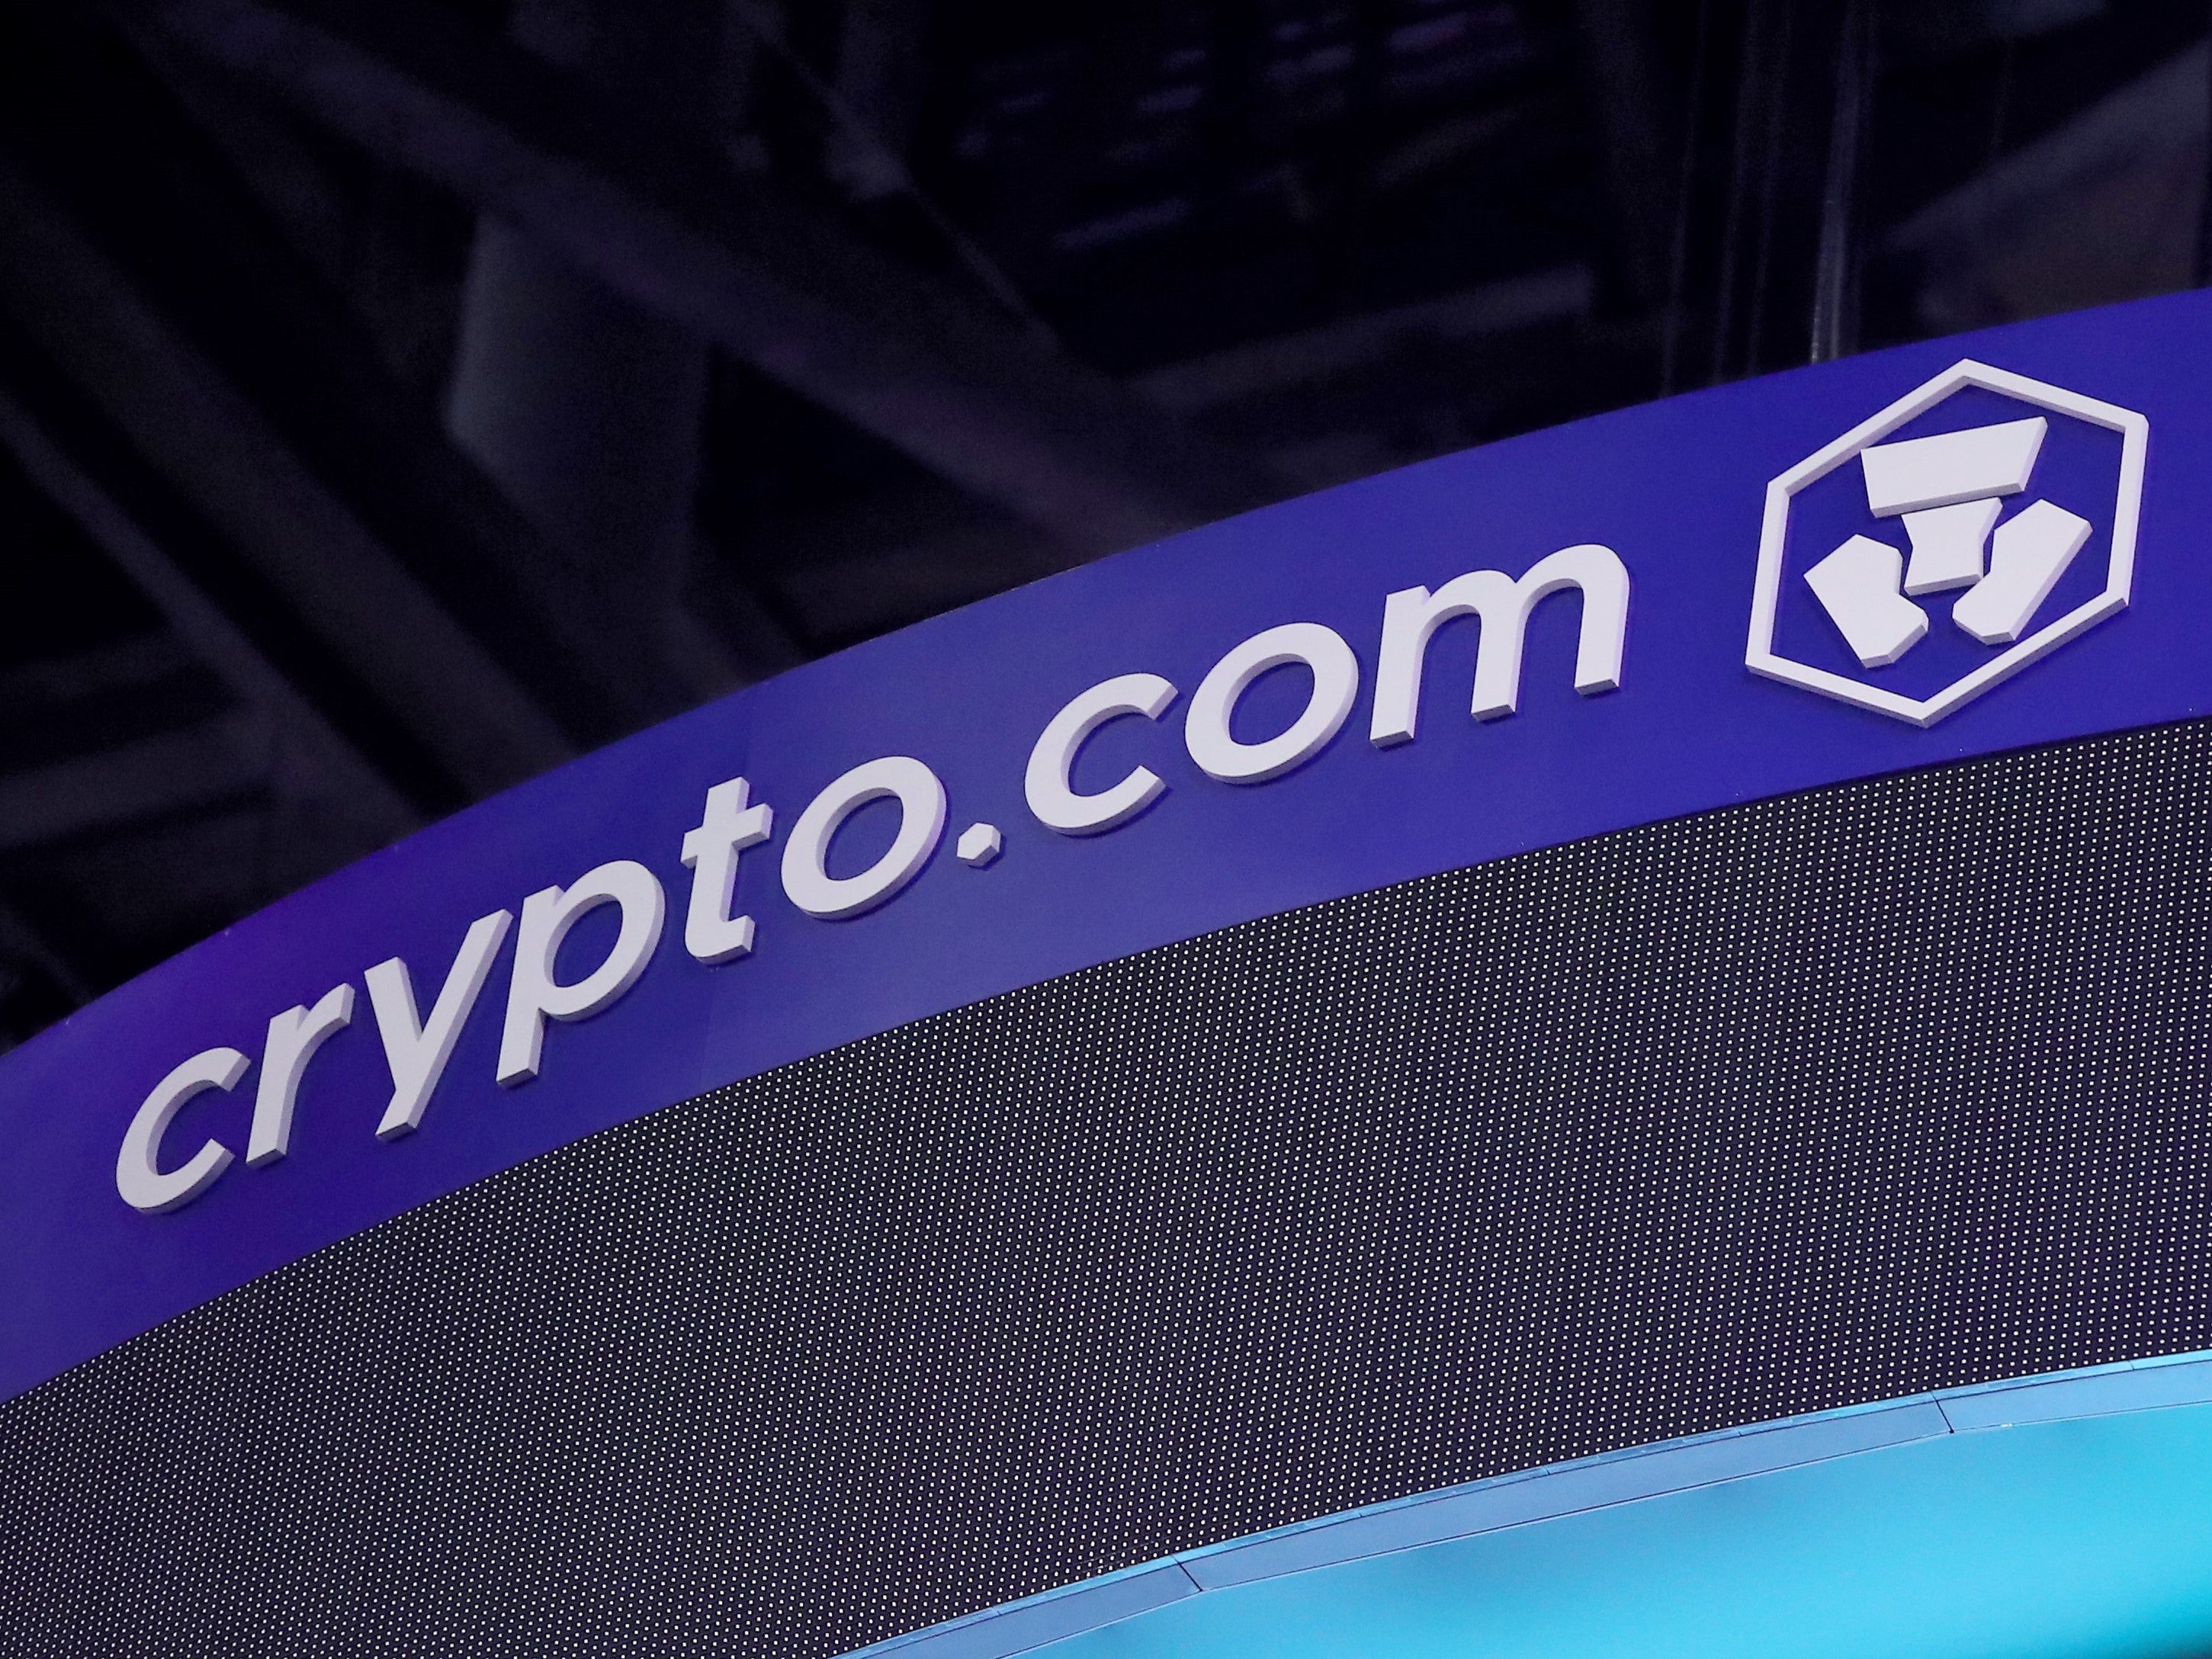 Crypto.com is one of the world’s most popular cryptocurrency platforms